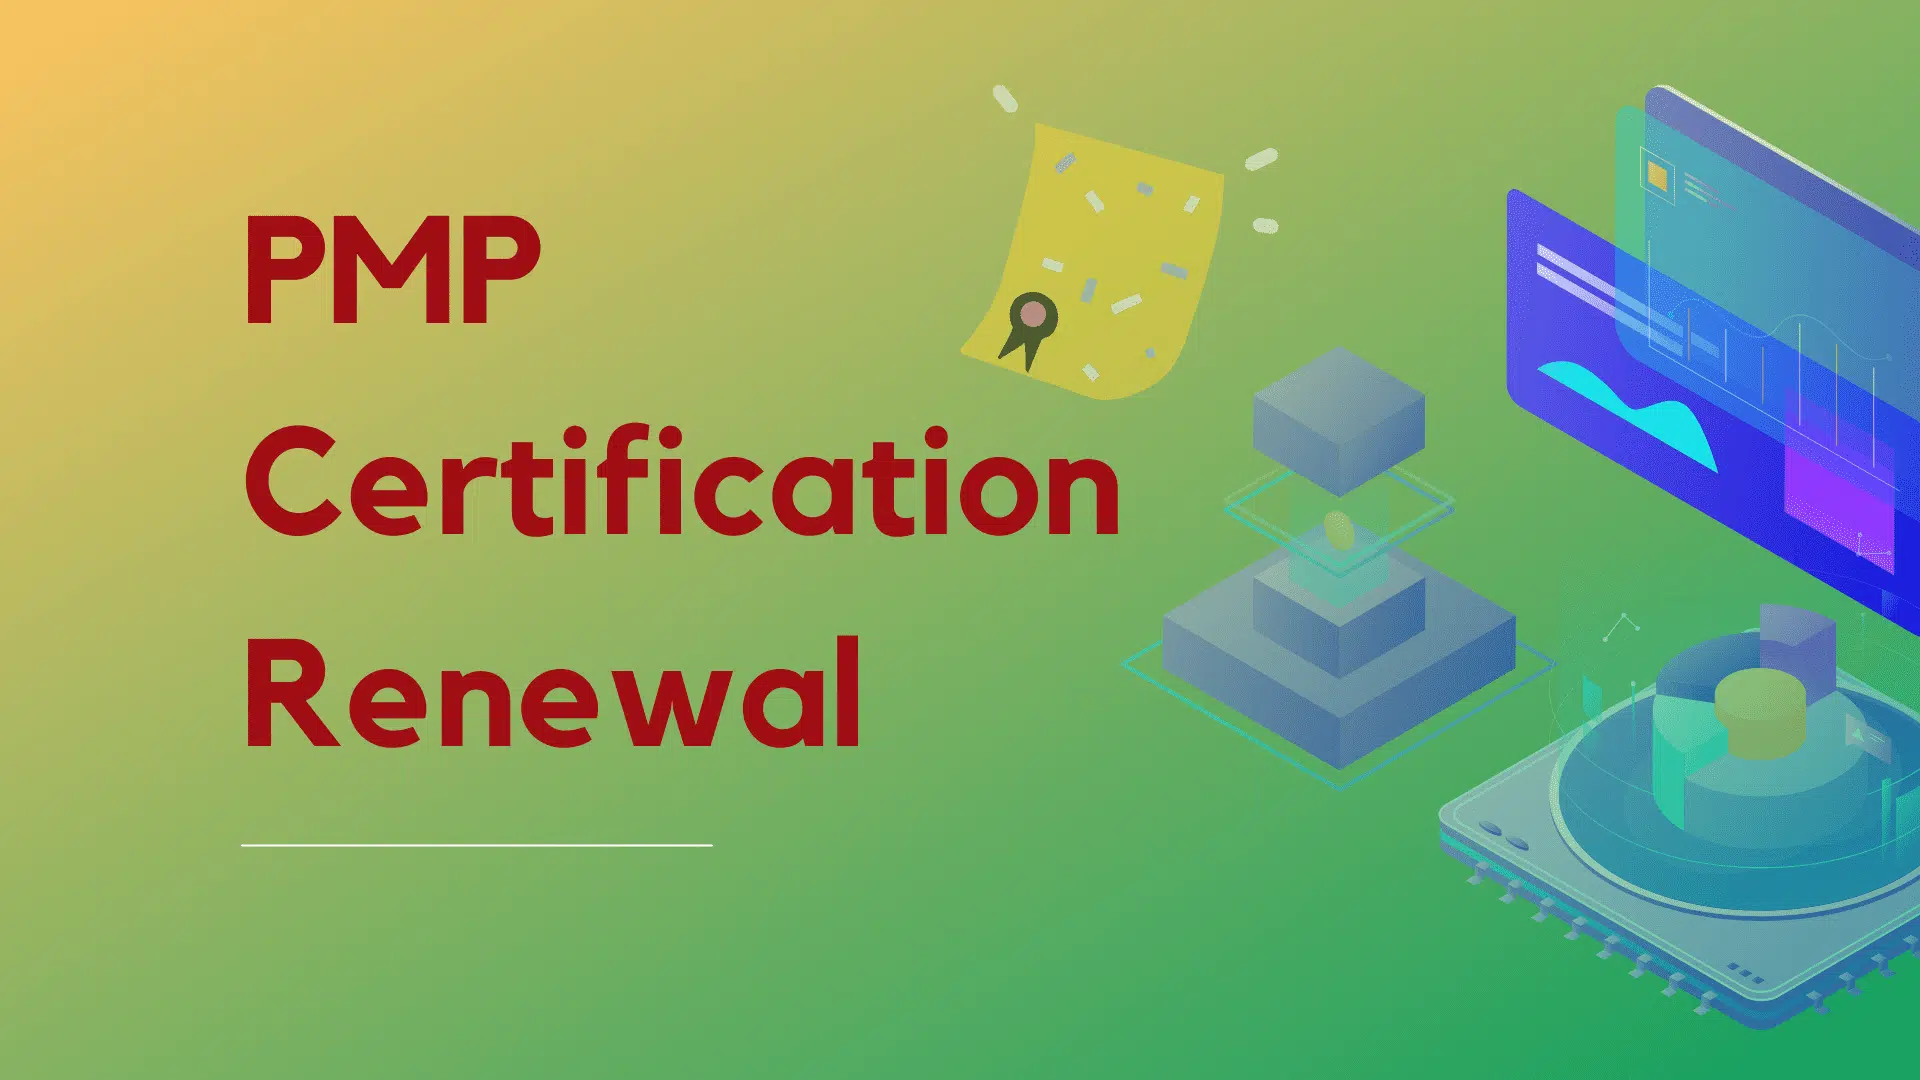 Pmp Certification Renewal Requirements